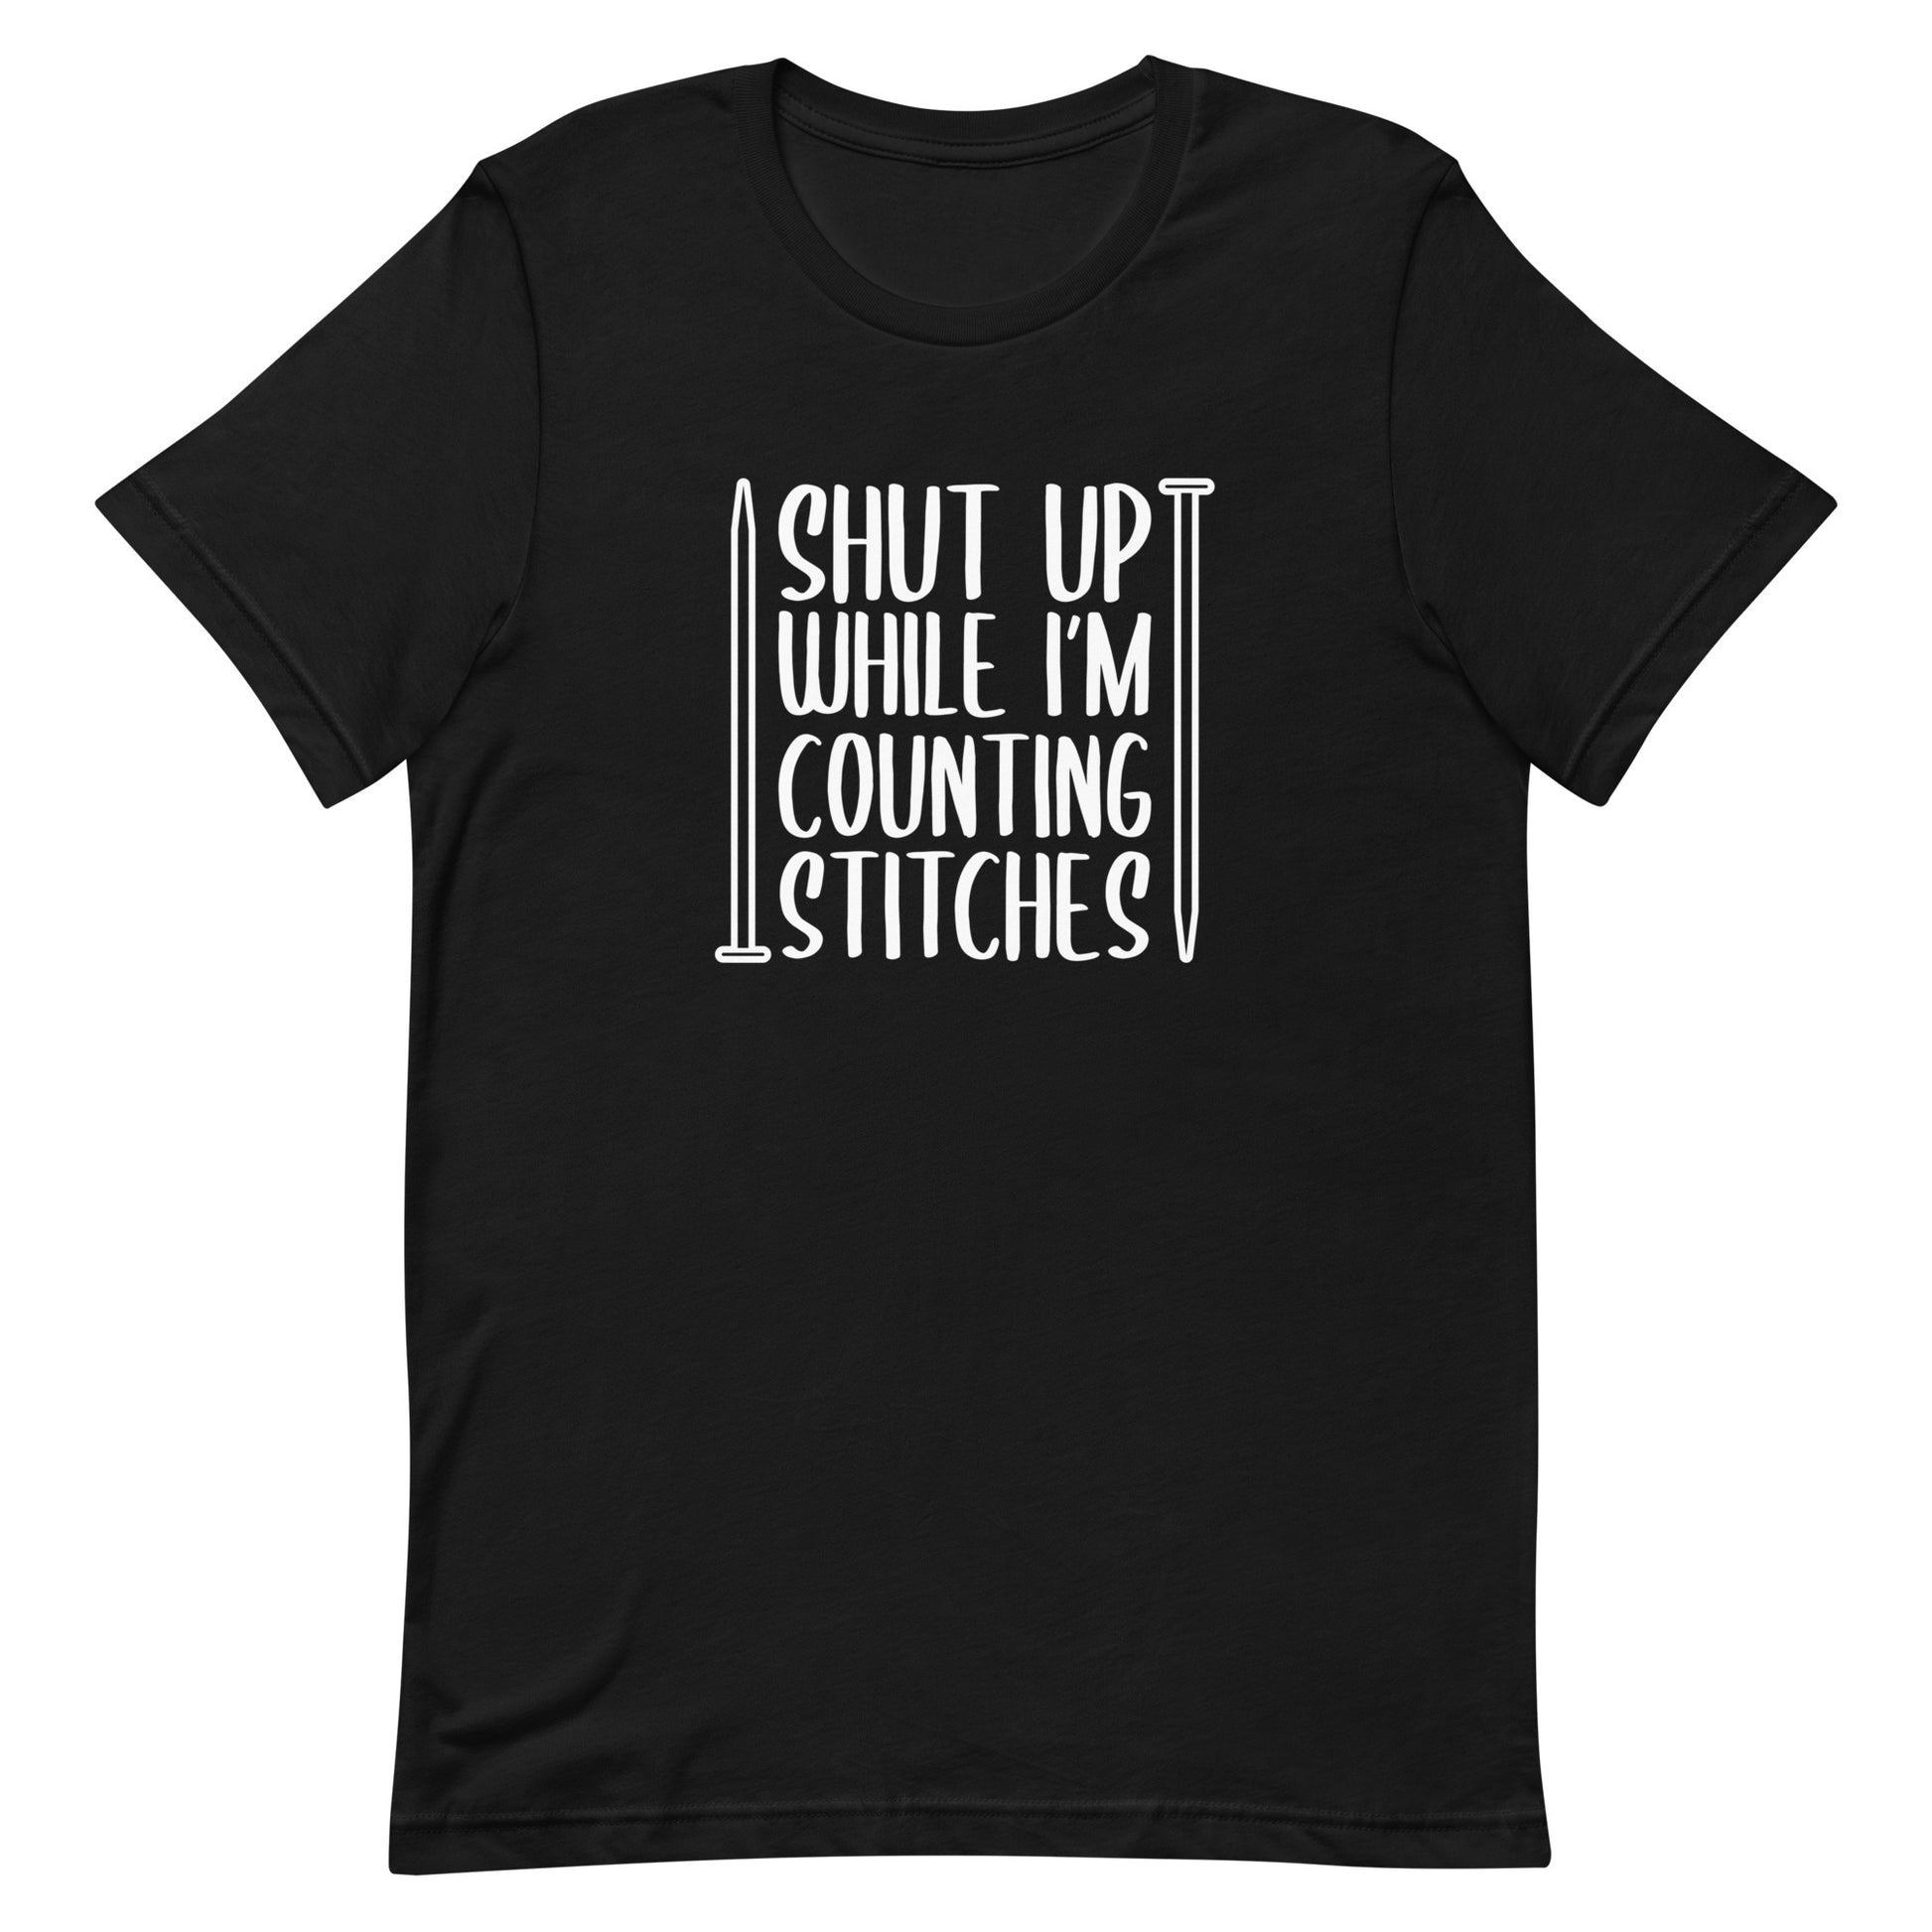 A black crewneck t-shirt with white text surrounded by two knitting needles. The text reads "Shut up while I'm counting stiches".